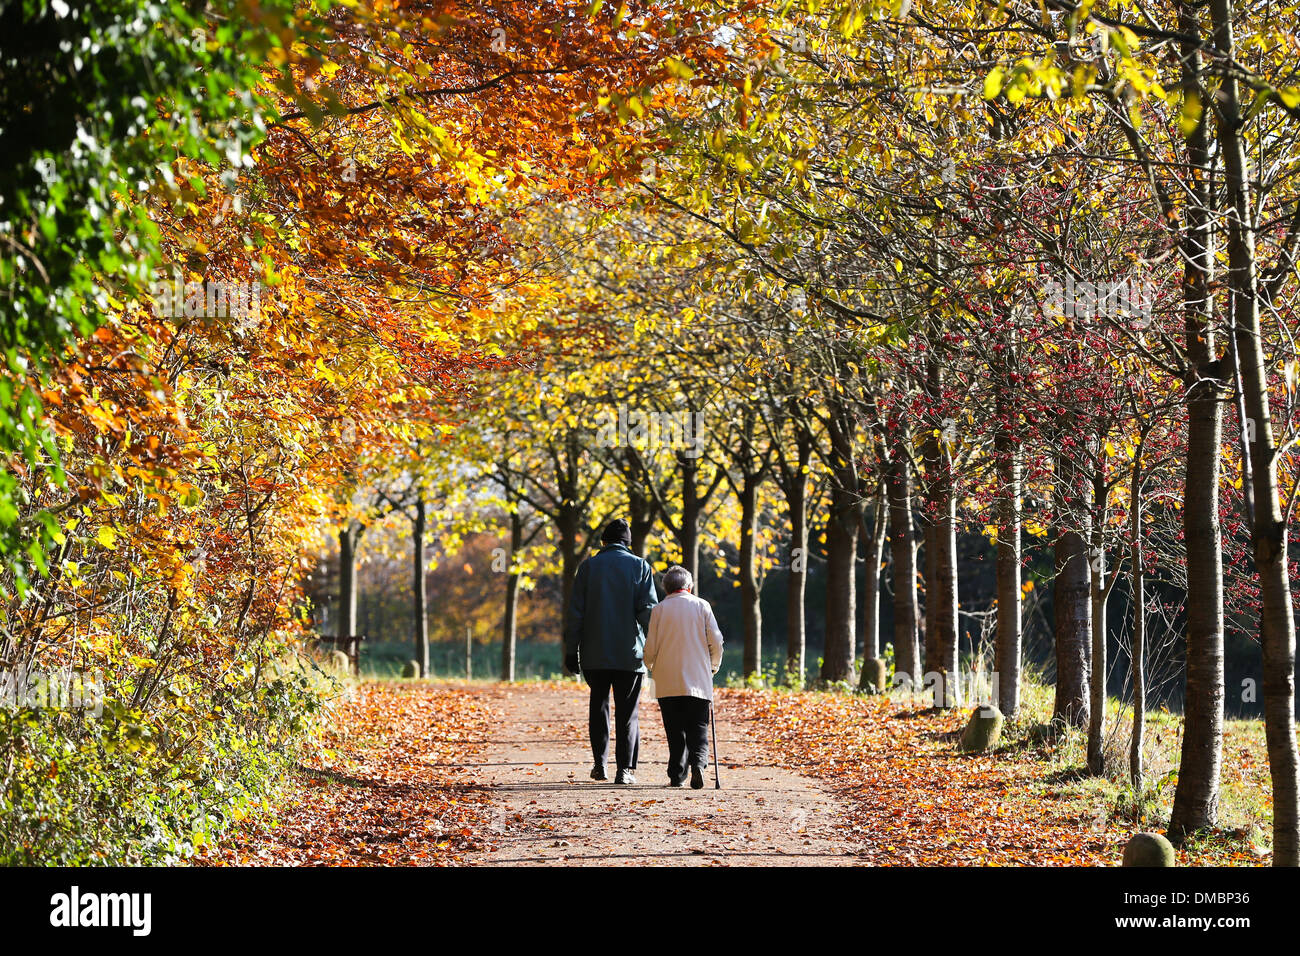 ELDERLY%20PEOPLE%20WALKING%20IN%20A%20PARK%20IN%20THE%20AUTUMN%20IN%20CAMBRIDGE%20Stock%20Photo%20-%20%20Alamy